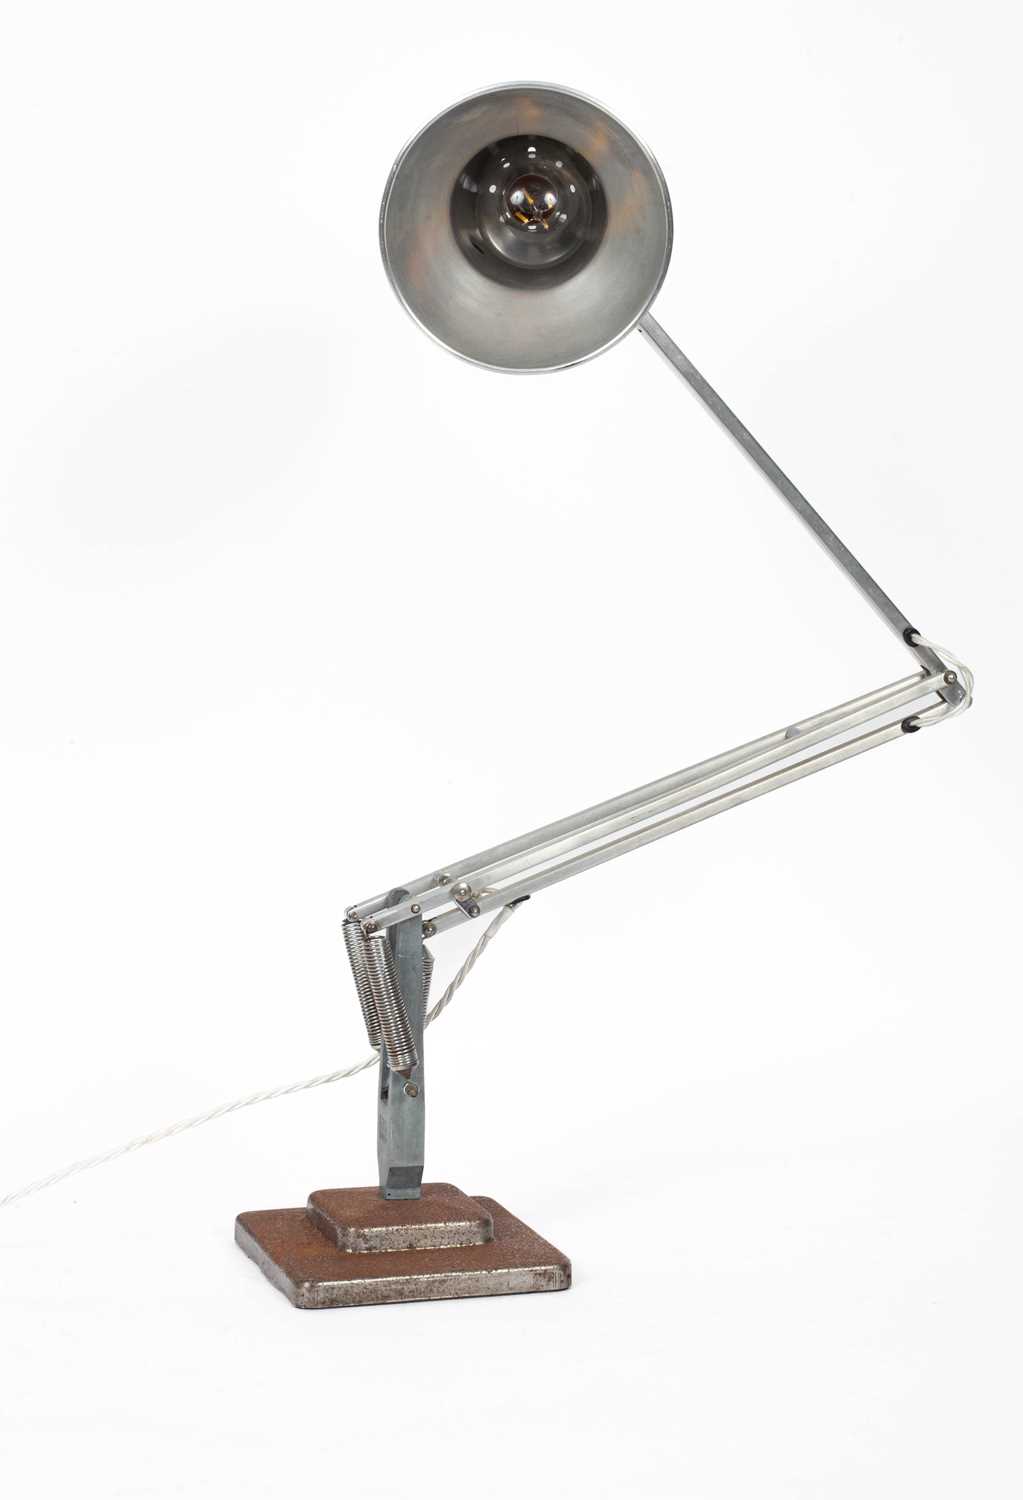 Herbert Terry & Sons: An Anglepoise Lamp - Image 2 of 2